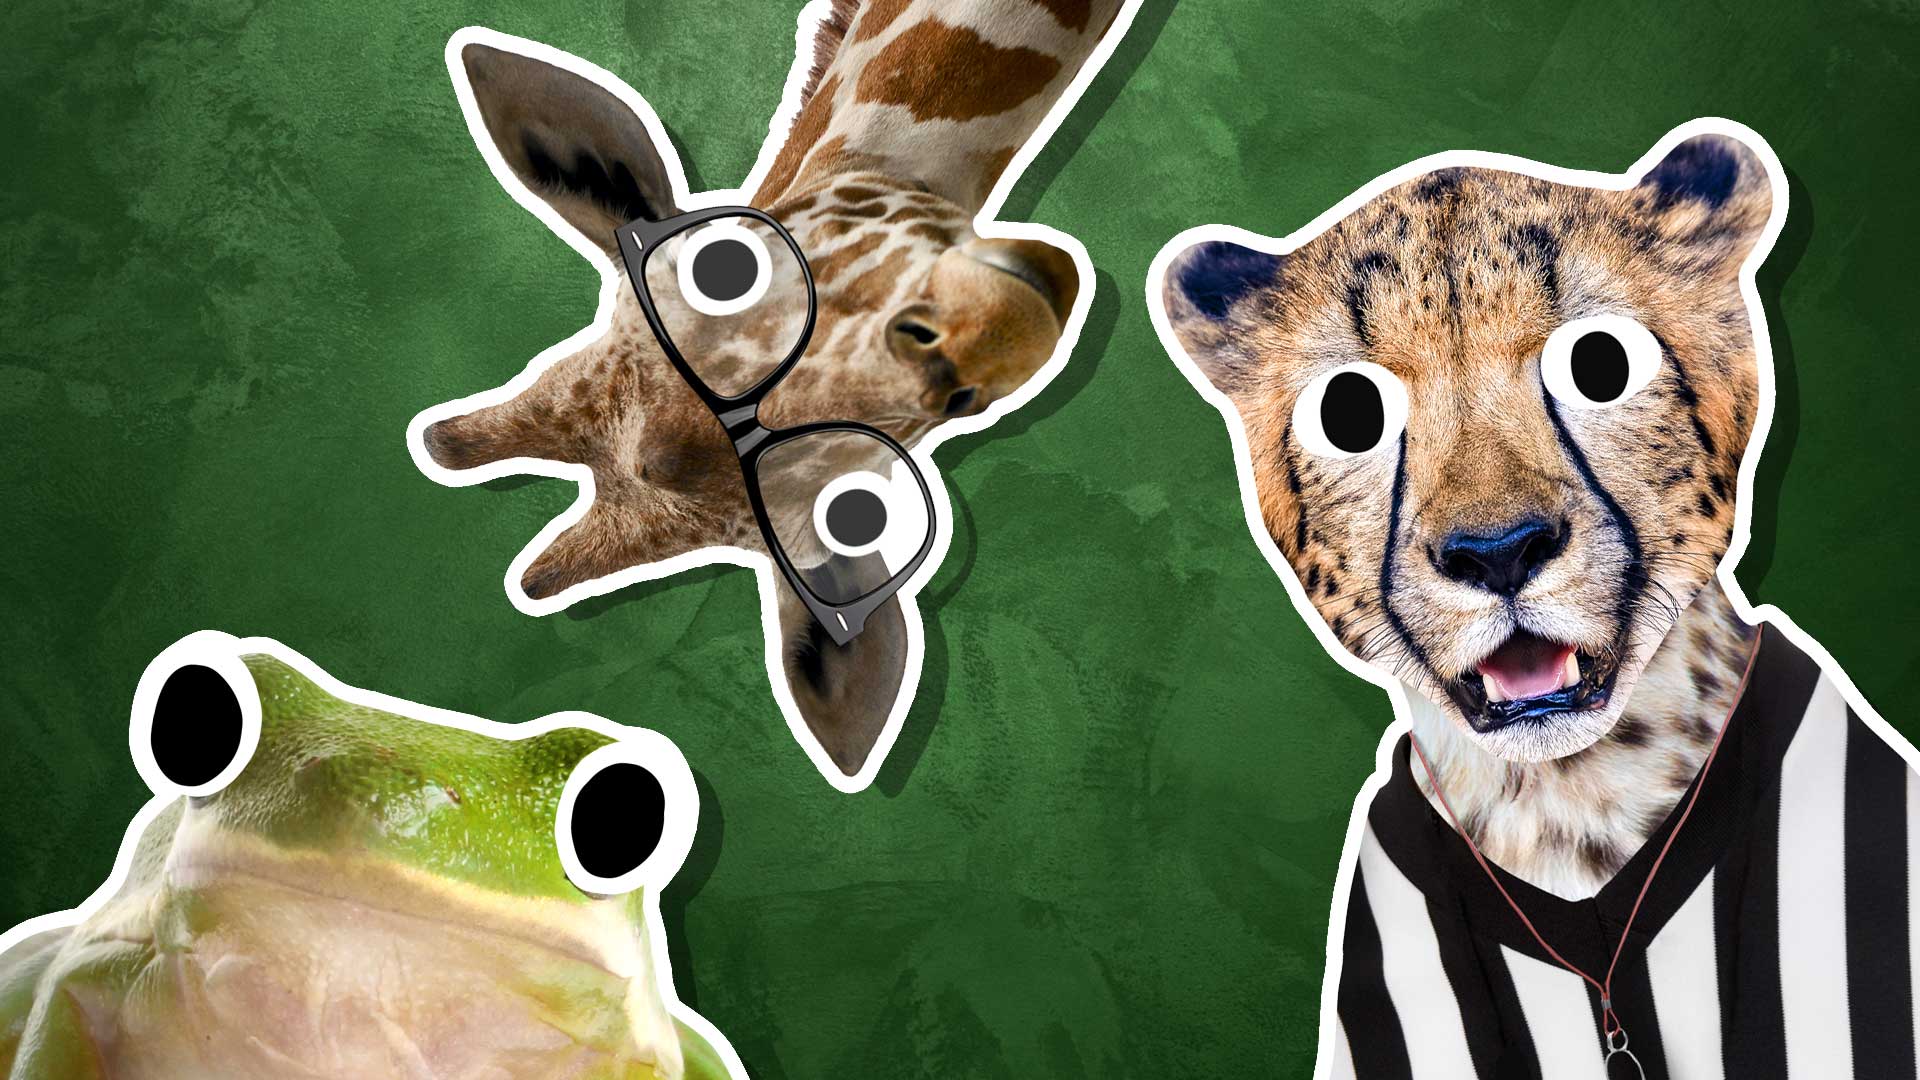 Some animals staring at you